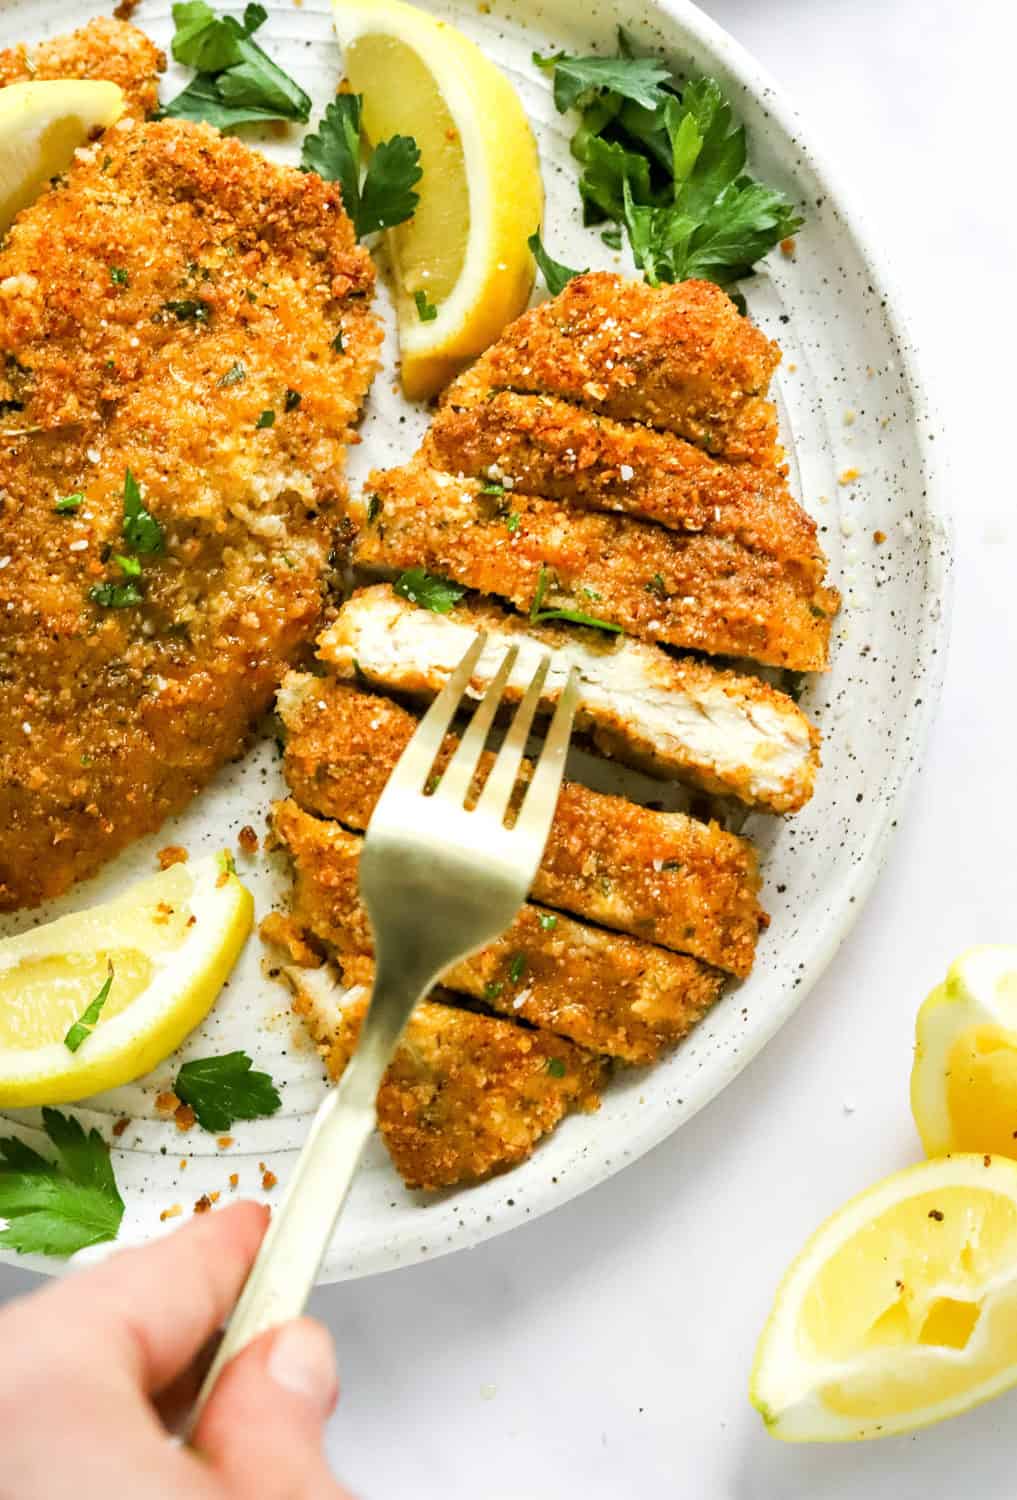 Sliced breaded chicken on a plate with more chicken next to it and a hand picking up a piece of chicken with a gold fork. 